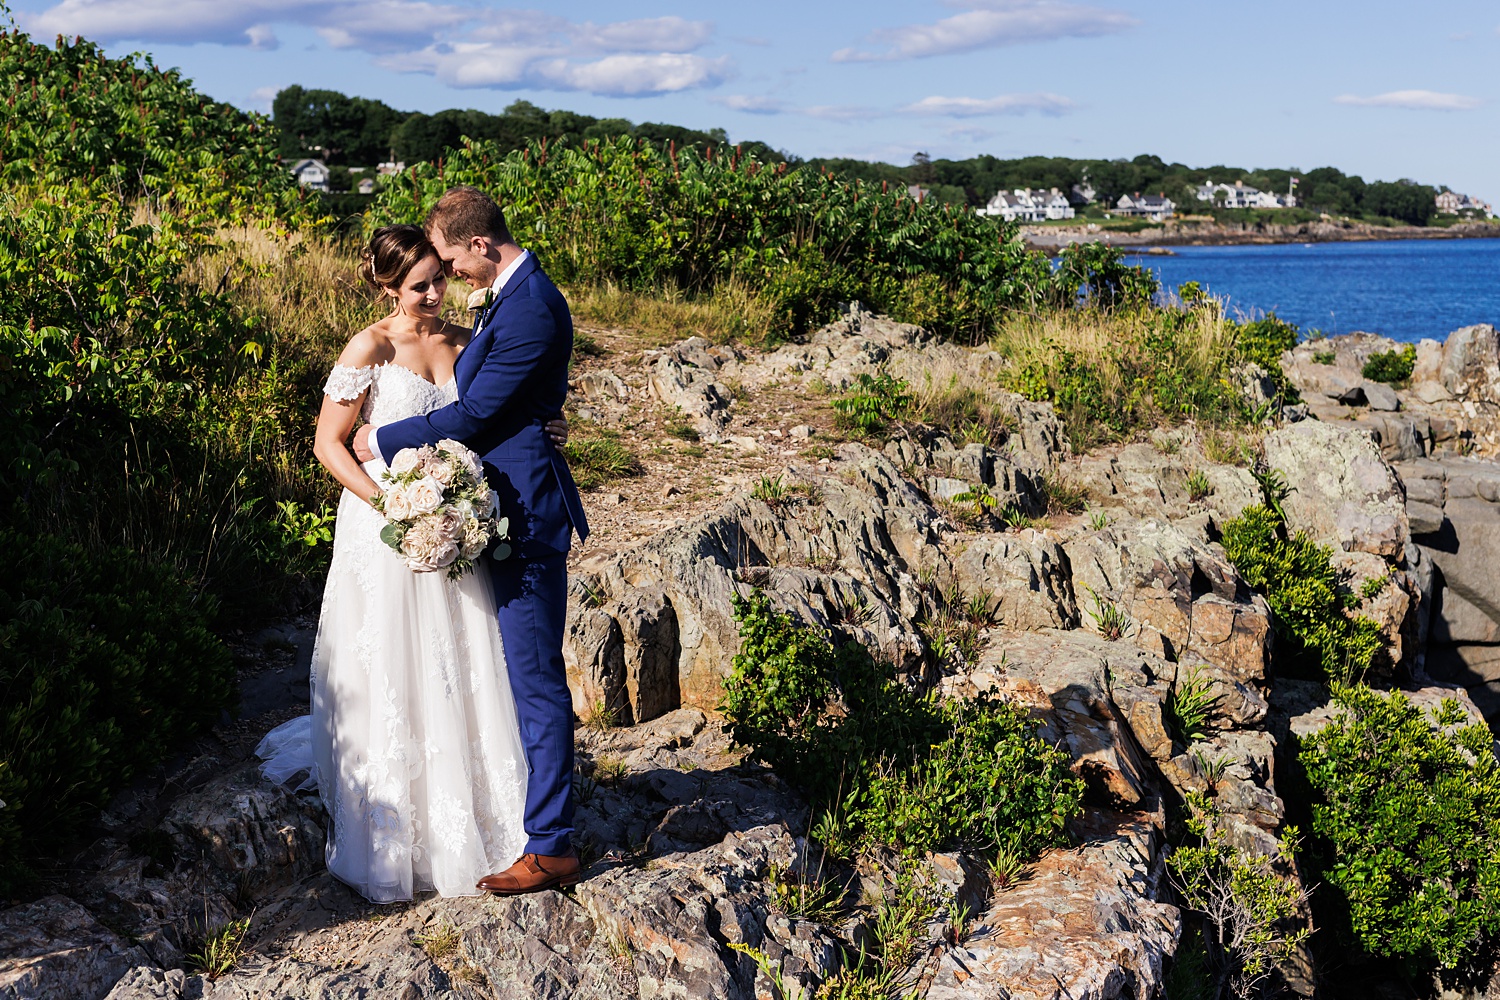 The bride and groom get close on the rocks at Stageneck Inn in Maine